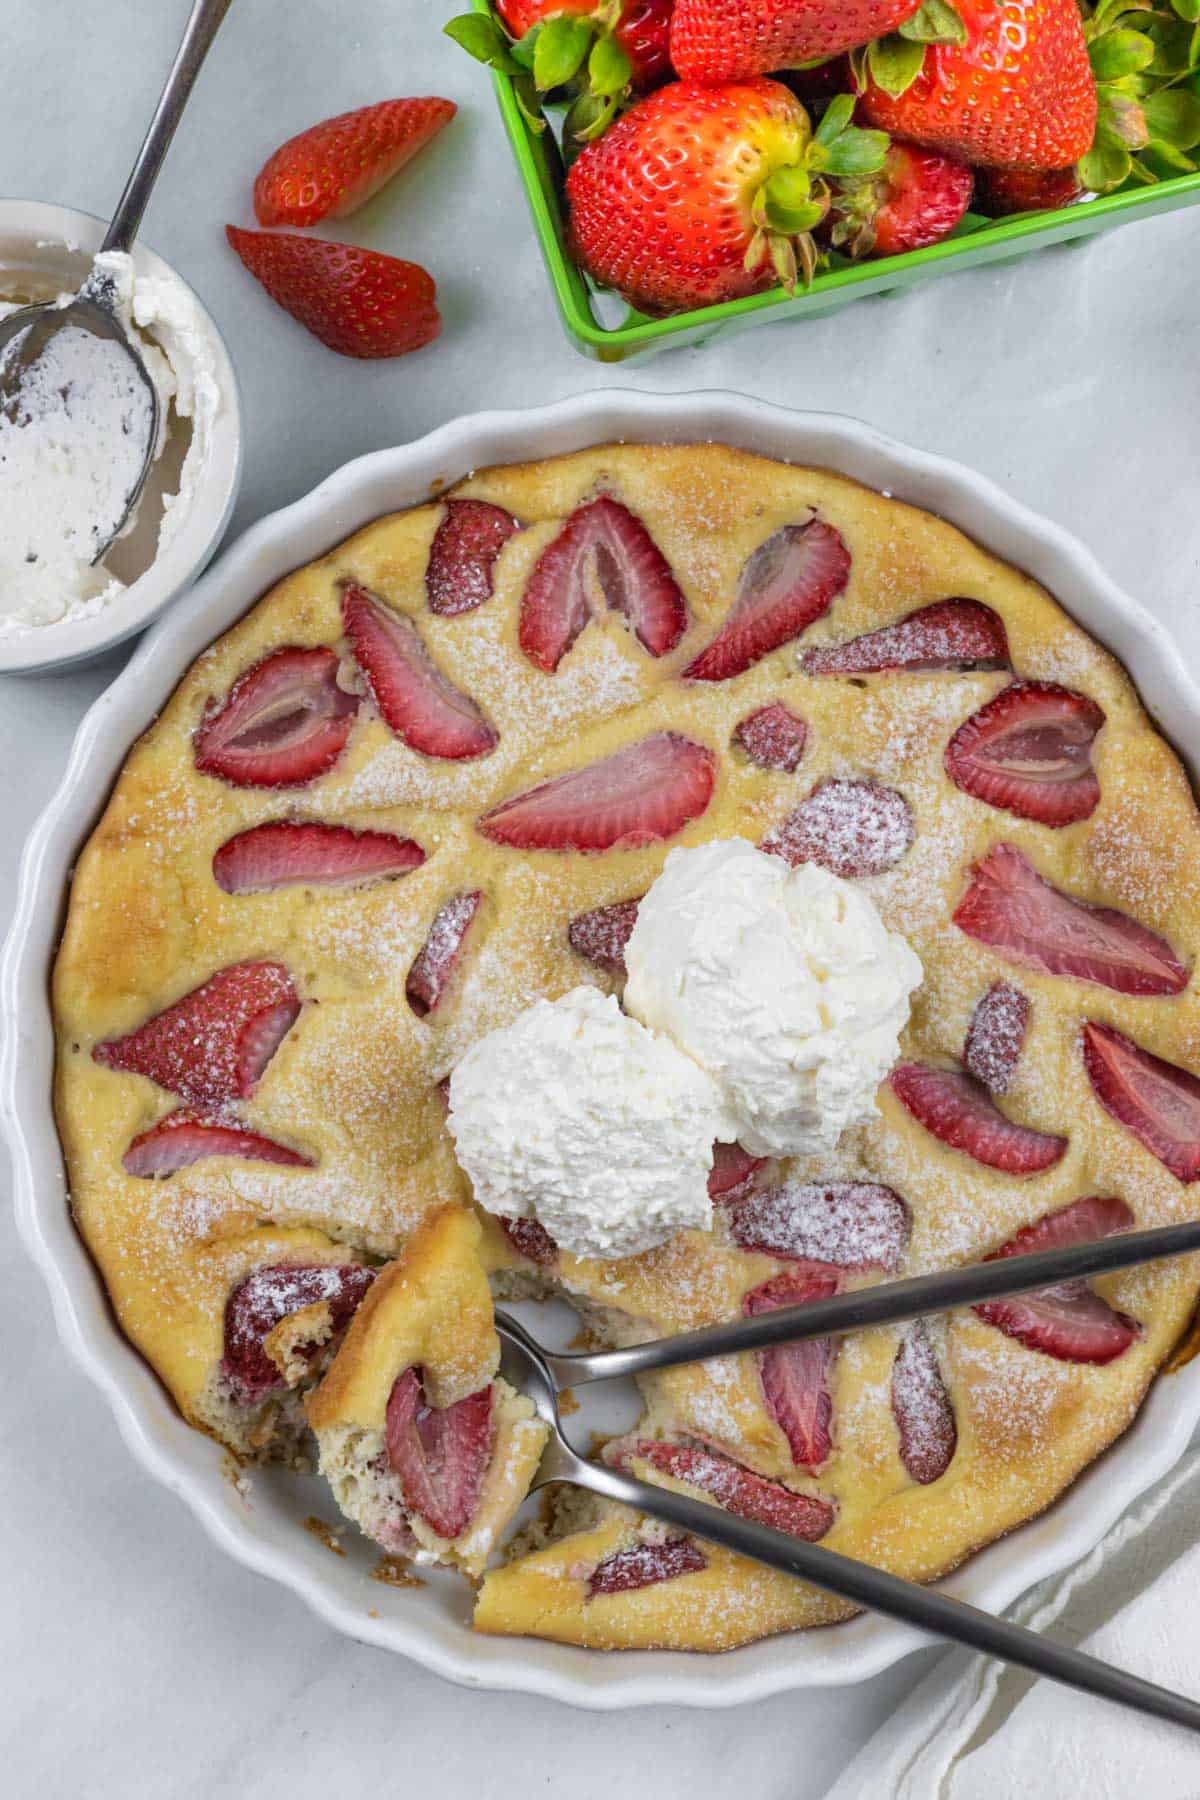 Strawberry clafoutis in pie dish with two overlapping spoons taking a scoop.